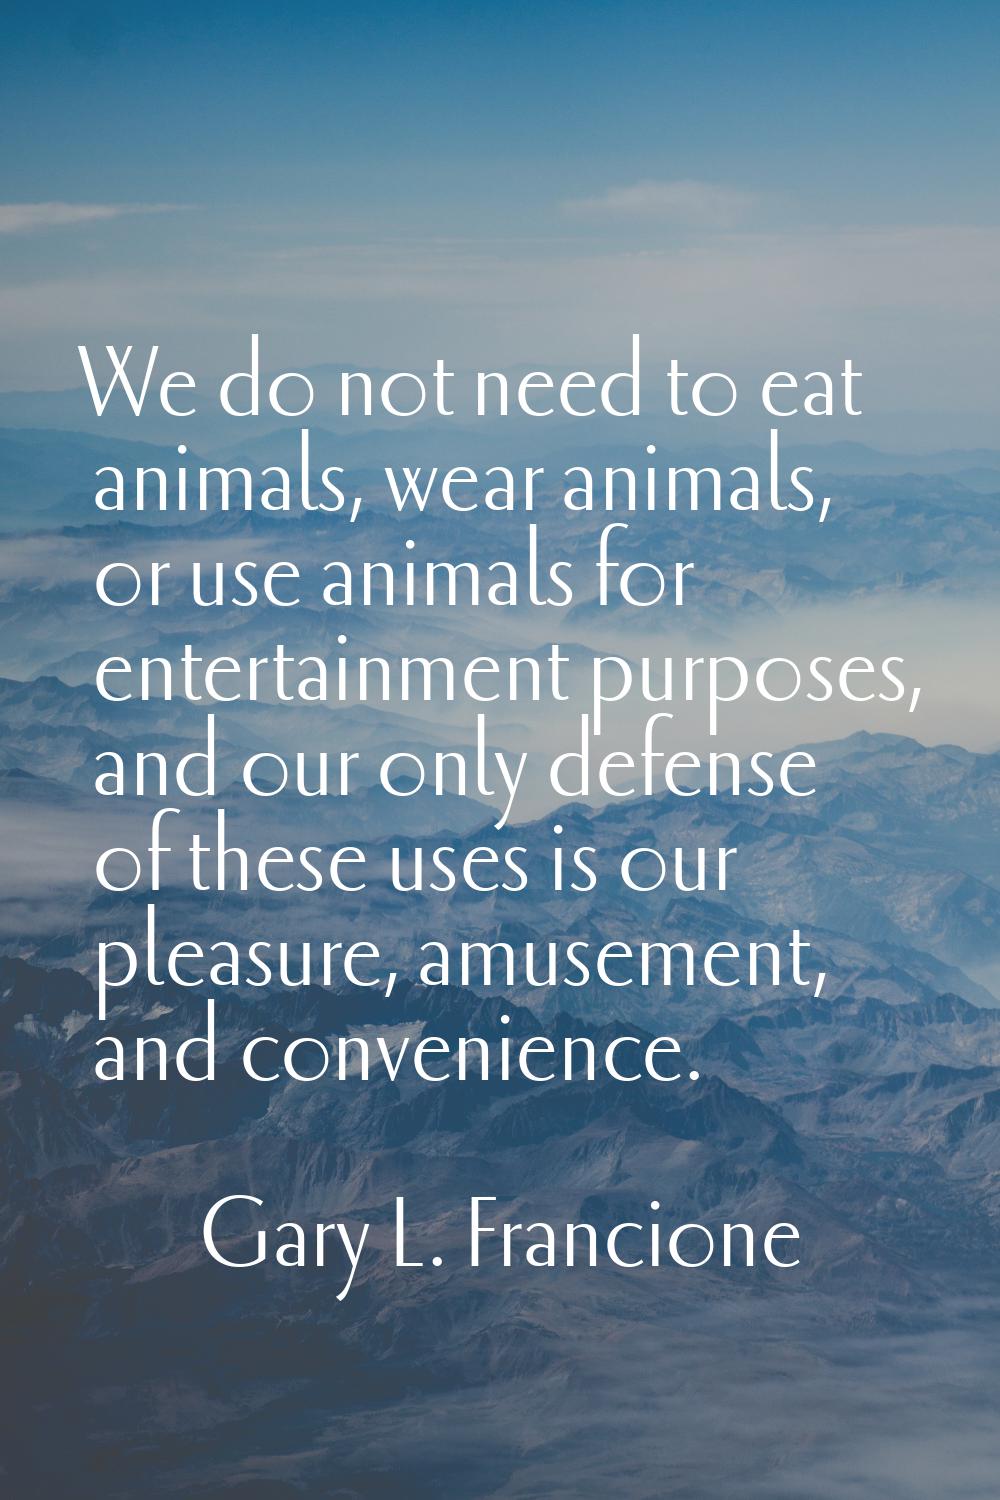 We do not need to eat animals, wear animals, or use animals for entertainment purposes, and our onl